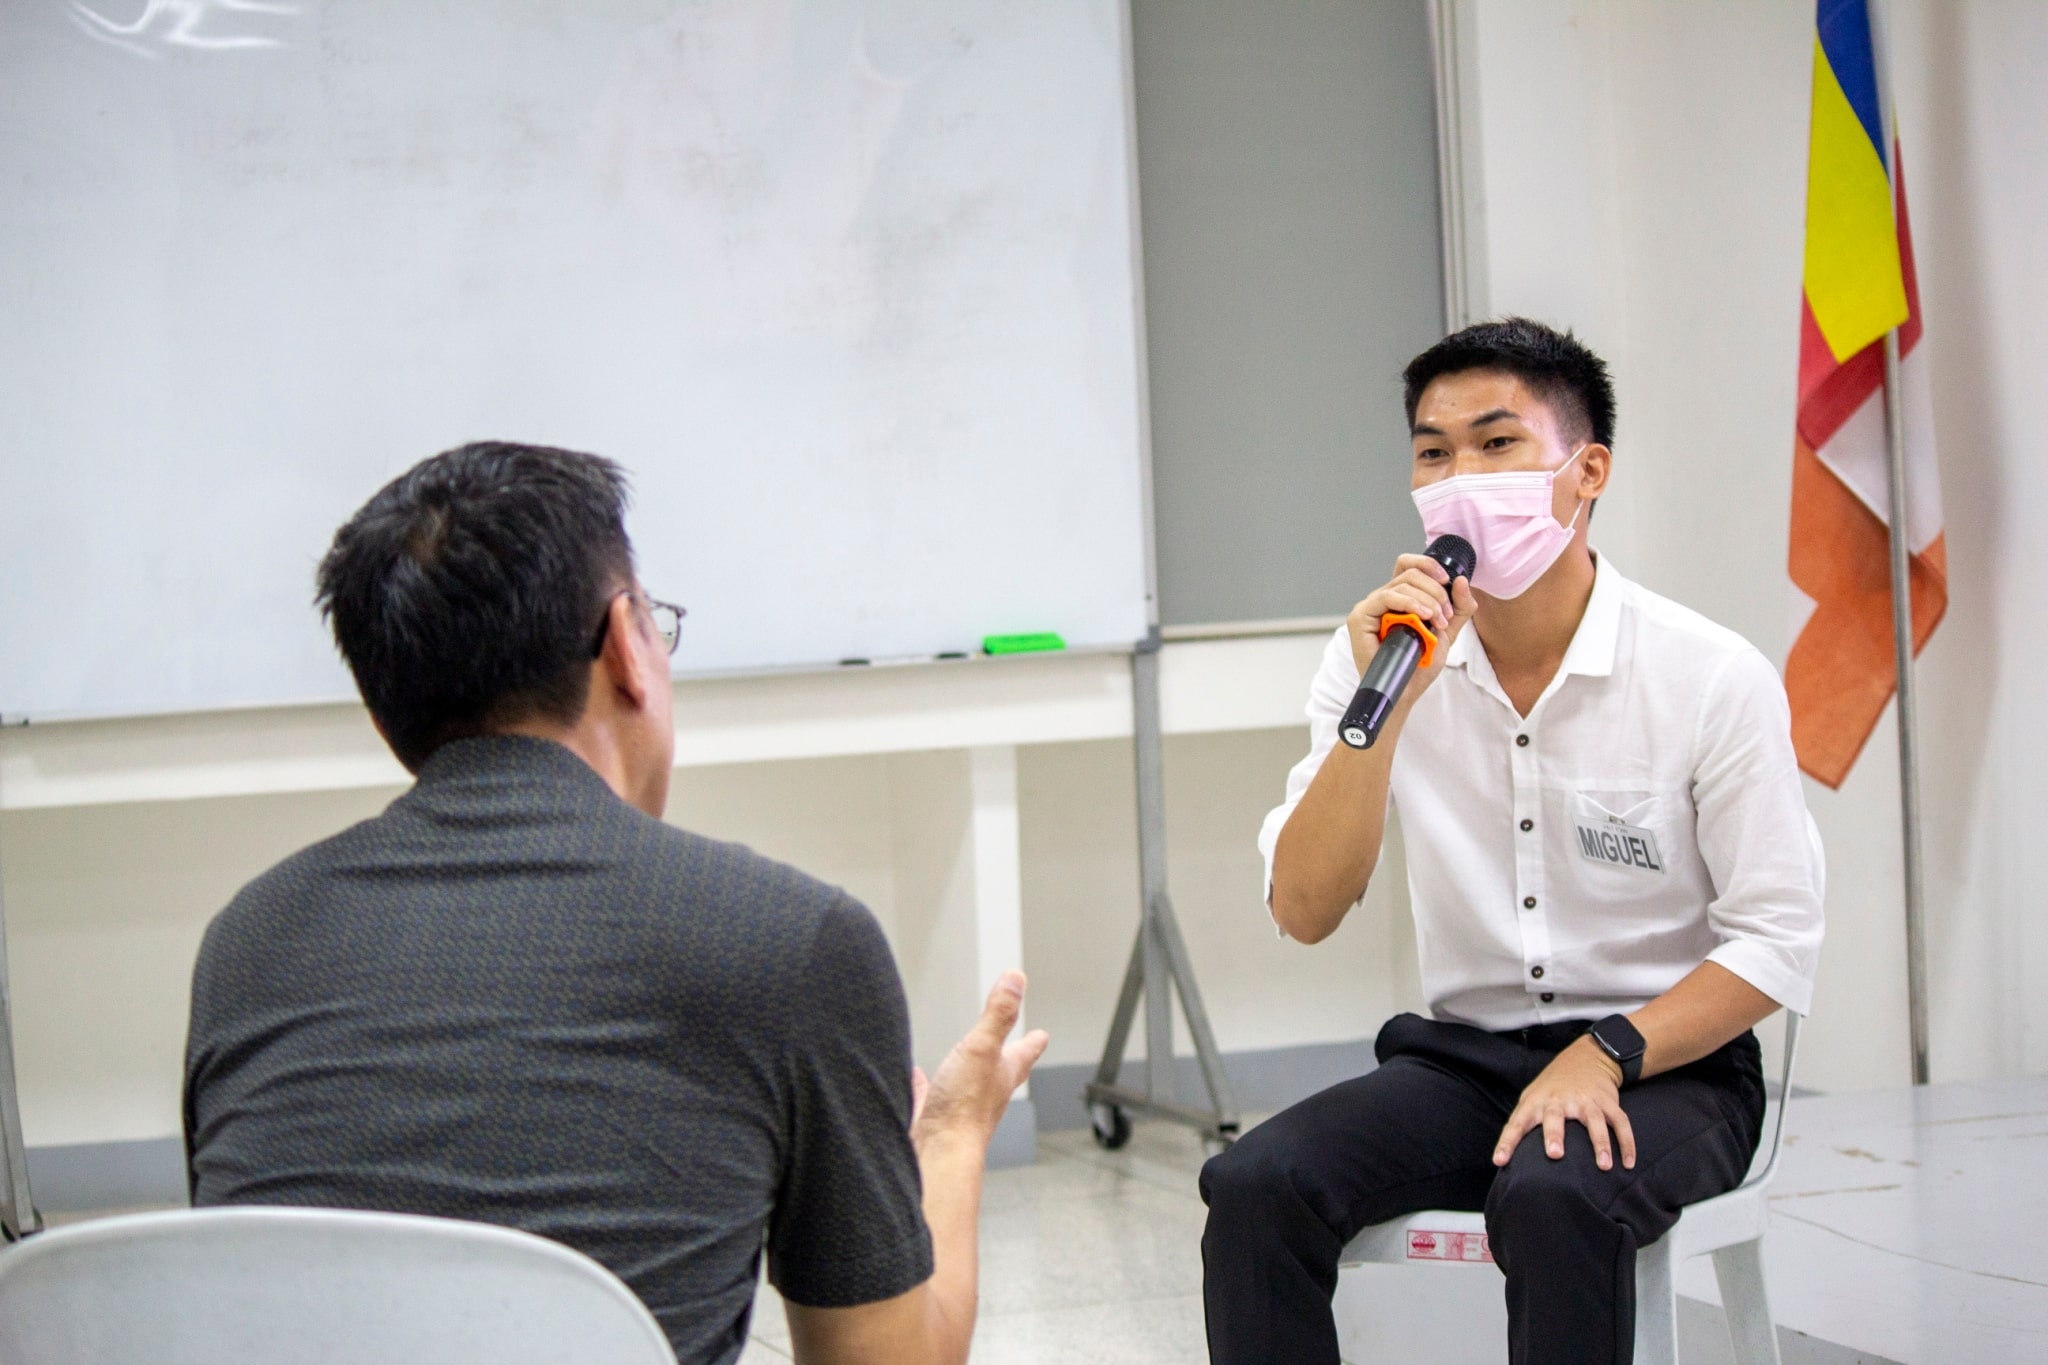 Miguel Bactol (in white) participated in a mock job interview during the talk with Darwin Soriano. 【Photo by Matt Serrano】